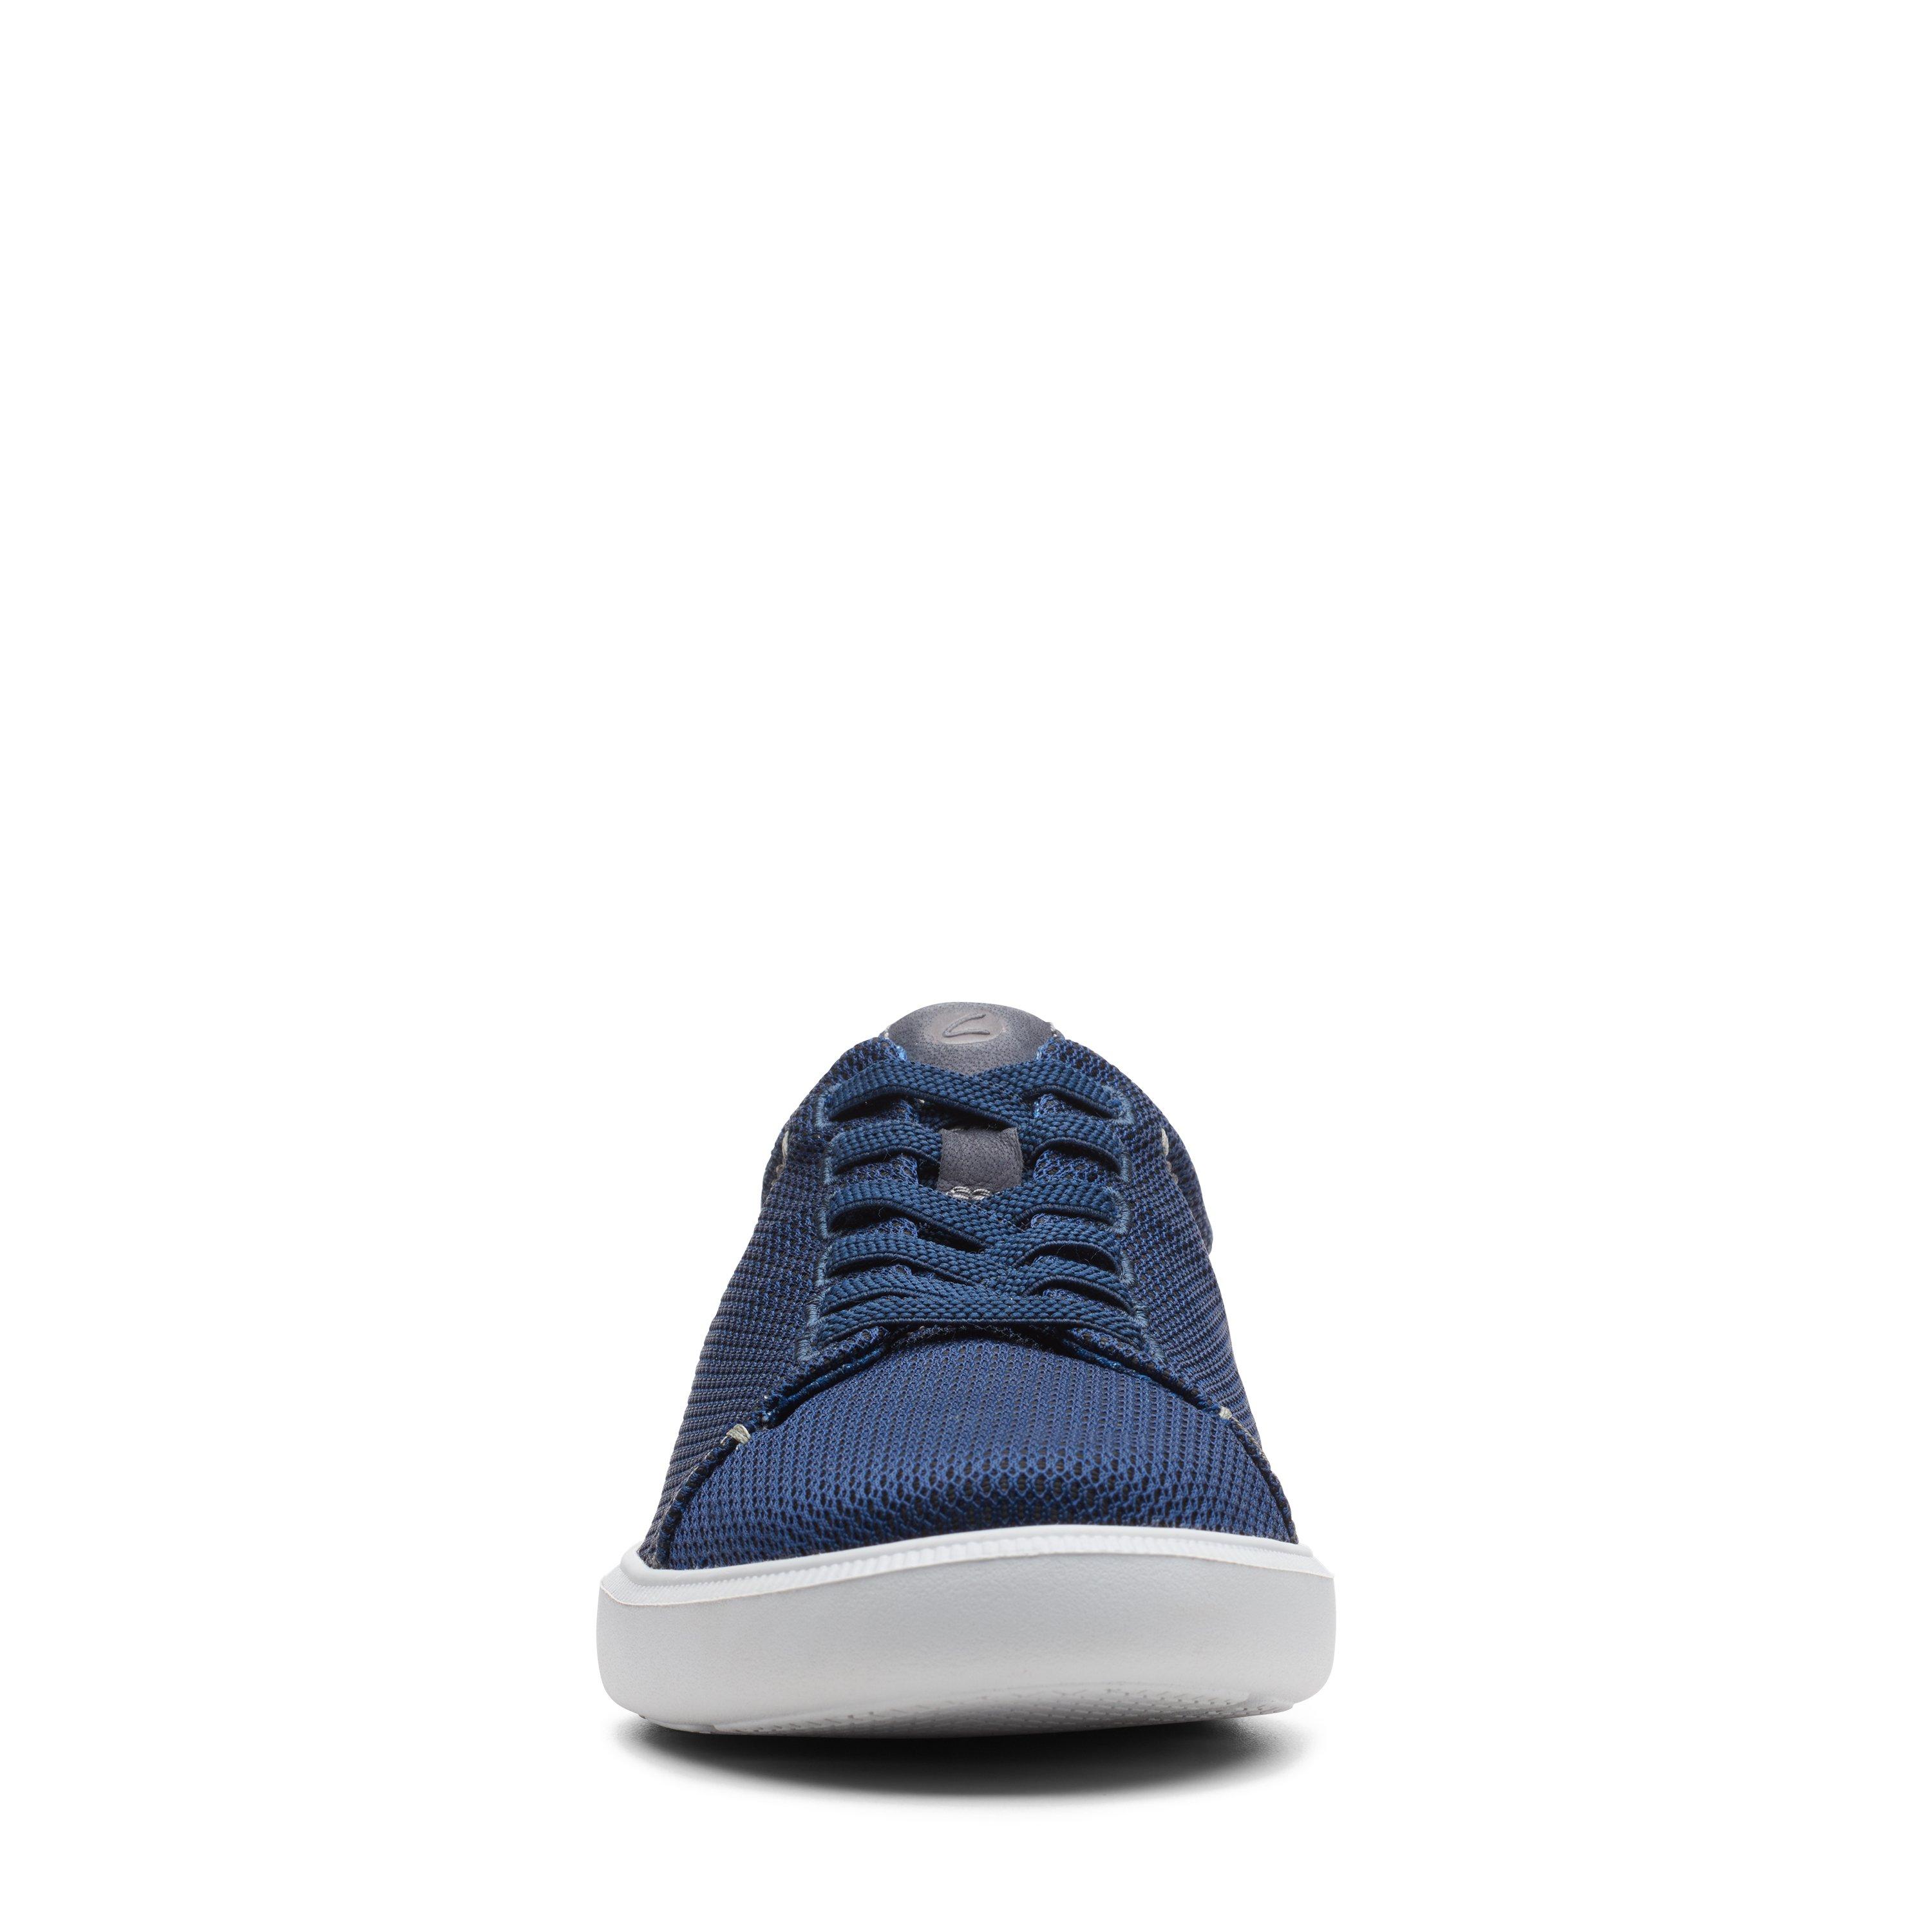 Clarks Mens Cambro Low Blue Casual Sneaker Shoes | eBay